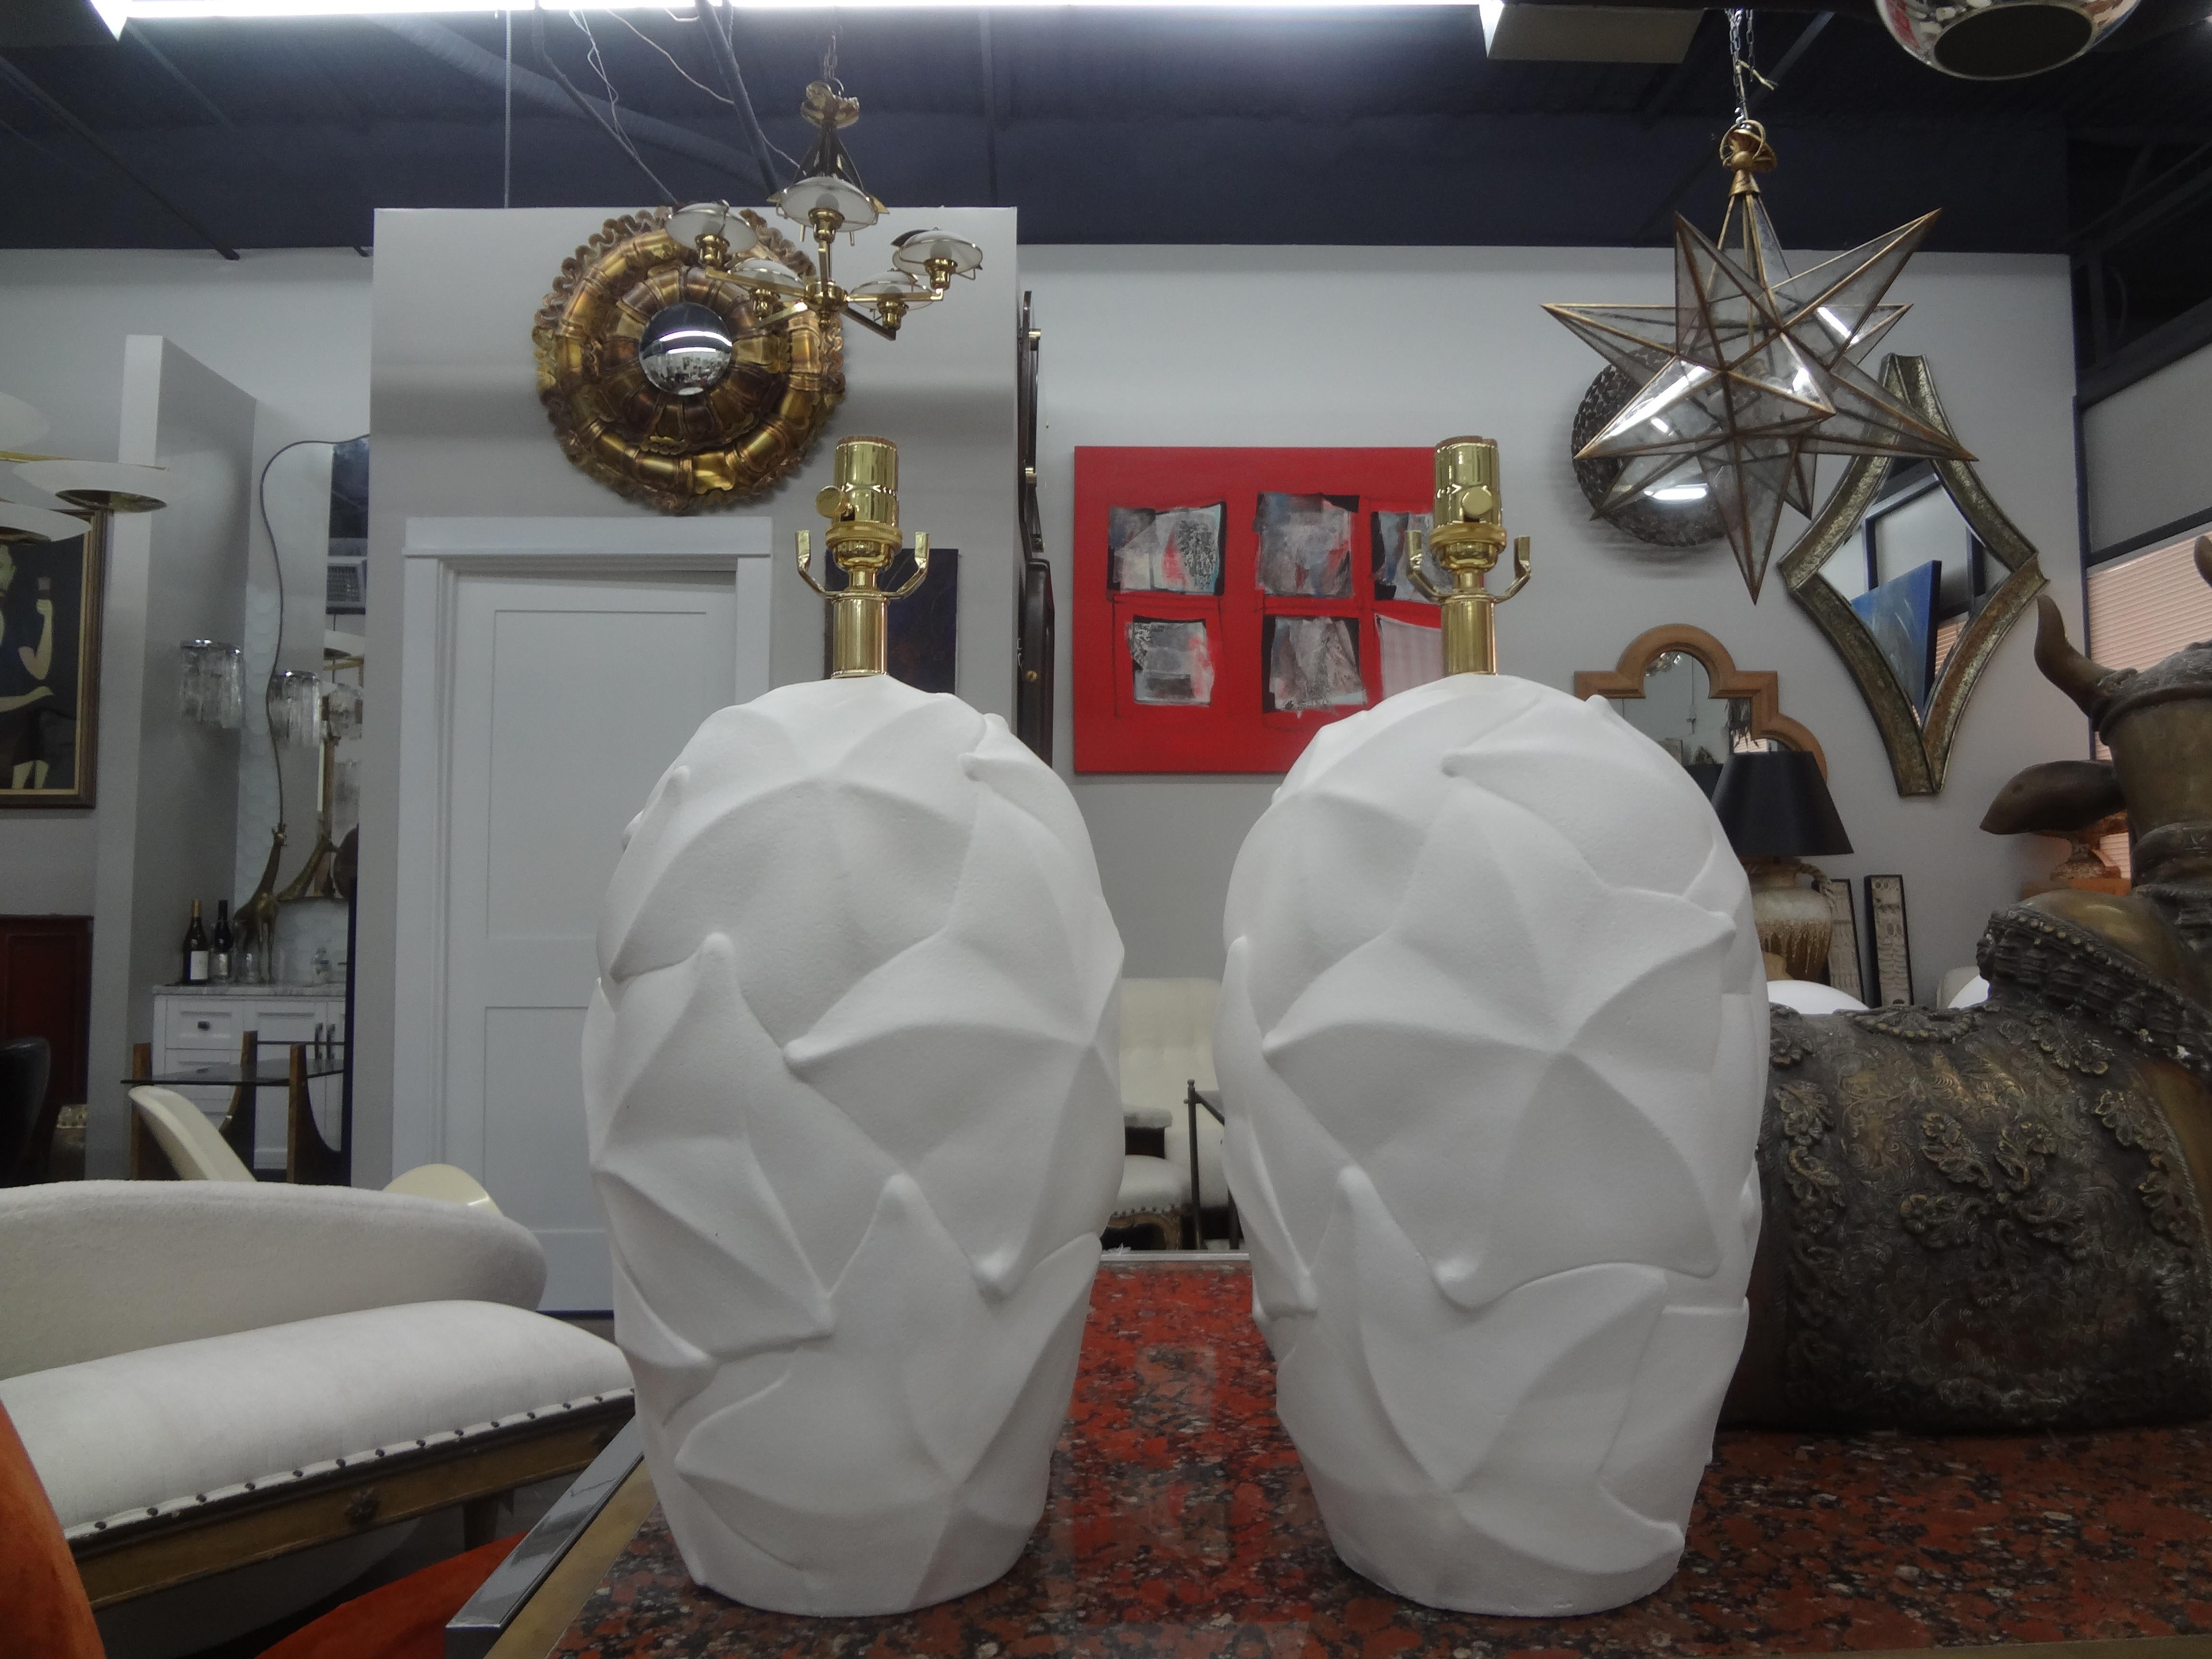 Pair Of Organic Modern Plaster lamps.
Stunning pair of midcentury organic modern plaster lamps in the manner of Serge Roche and Dorothy Draper. This stylish pair of beautifully designed lamps have been newly wired with new sockets.